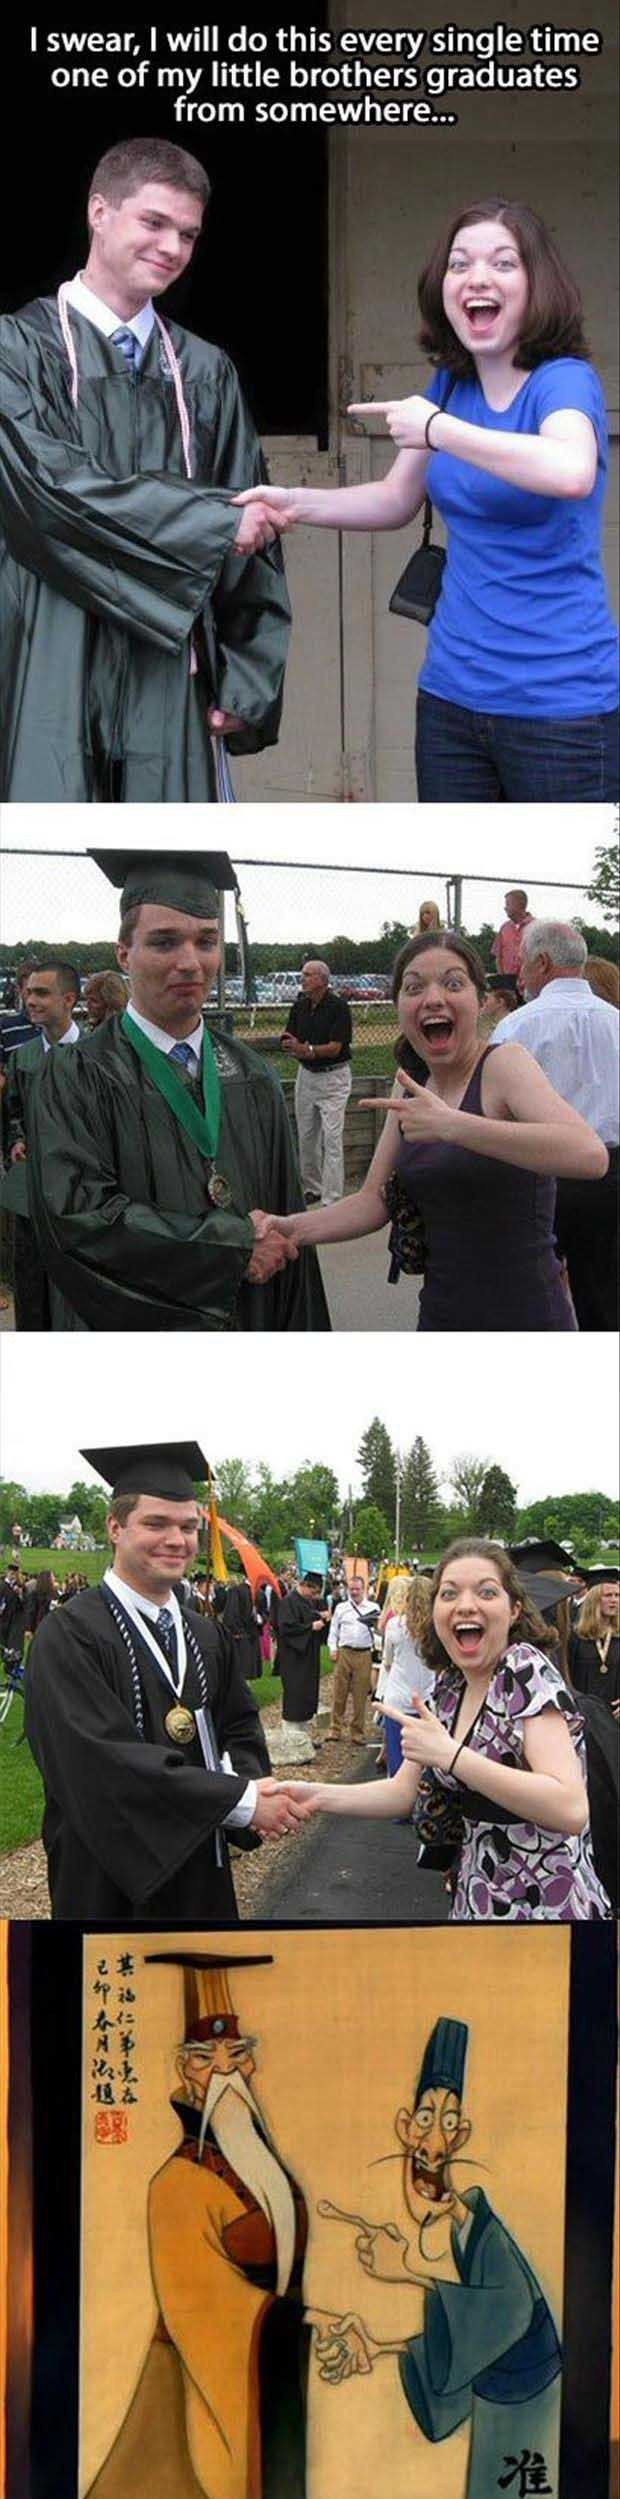 Cool sister! - Reddit, Brother, Sister, High school graduation, The photo, Humor, Translation, Picture with text, Longpost, Sisters